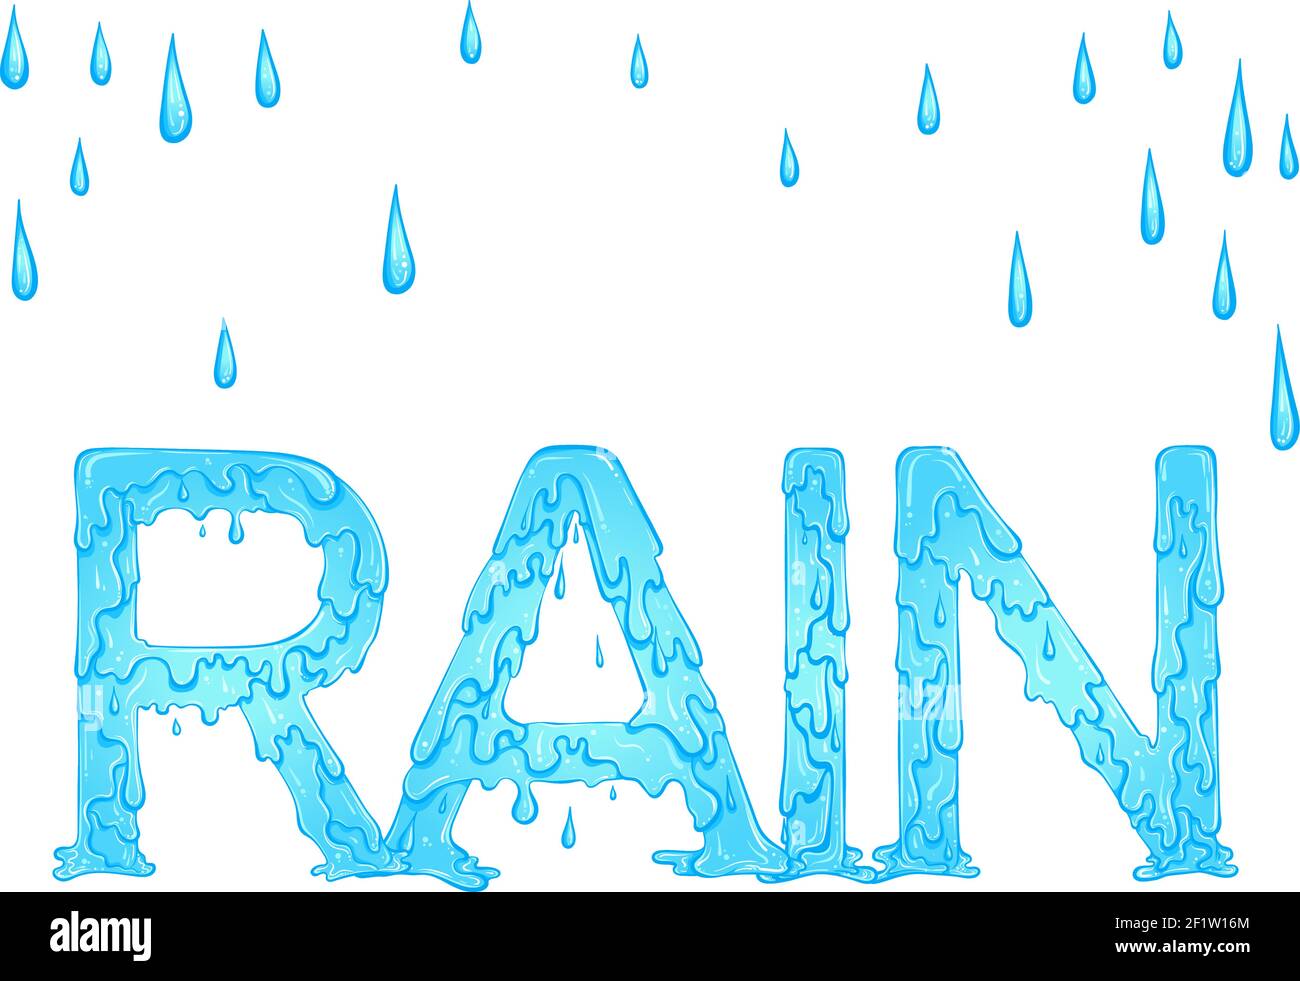 Lettering dripping word Rain blue color with drops. Vector illustration isolated on white background. Font design in hand drawn style. Words for print, banners, posters, books, icon, stickers. Stock Vector